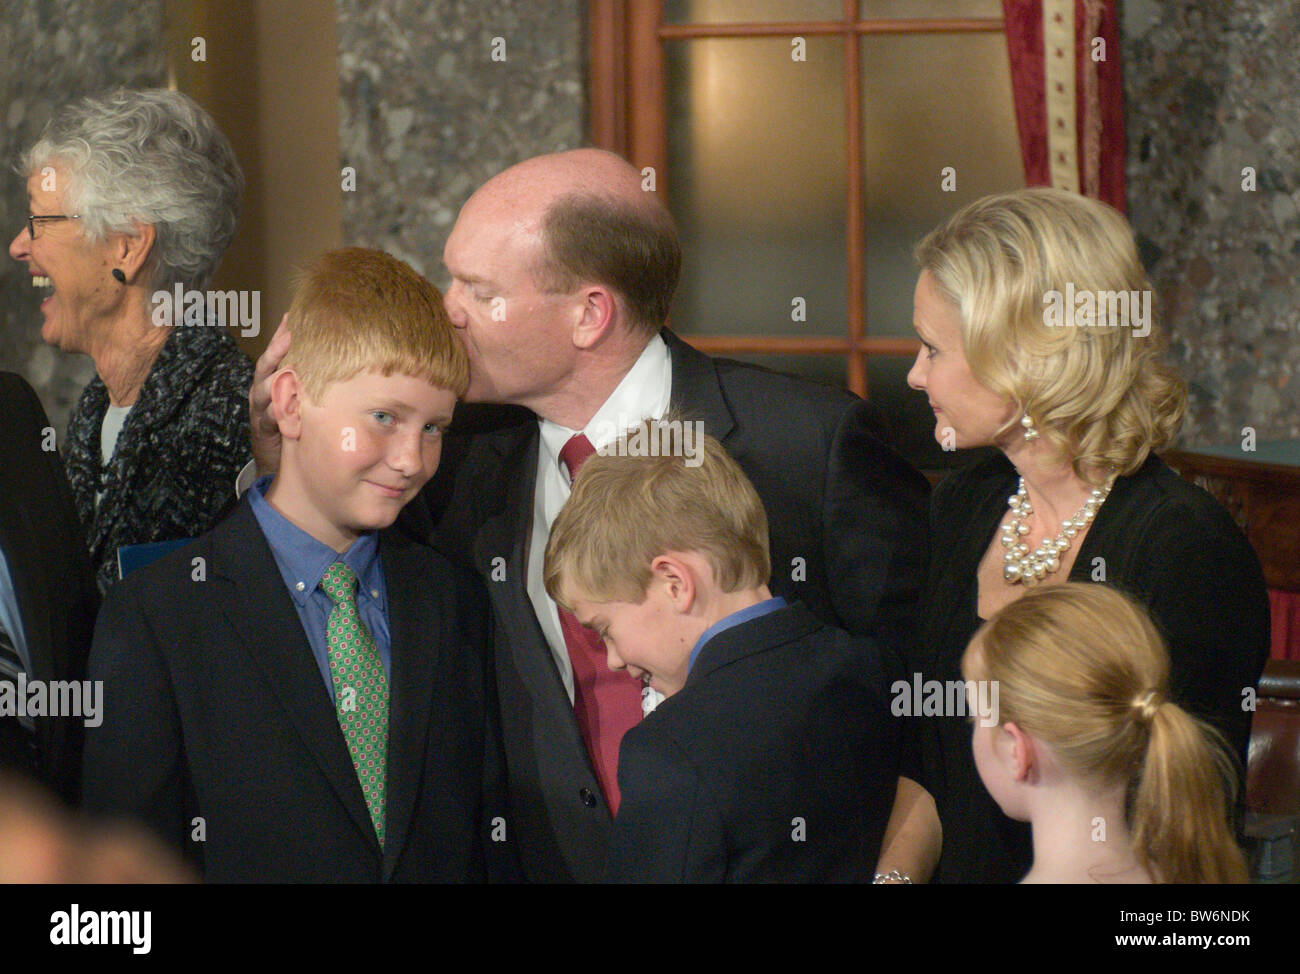 Sen. Chris Coons, D-Del., kisses his son Mike after Vice President Joe Biden performed a ceremonial swearing-in, in the Capitol' Stock Photo